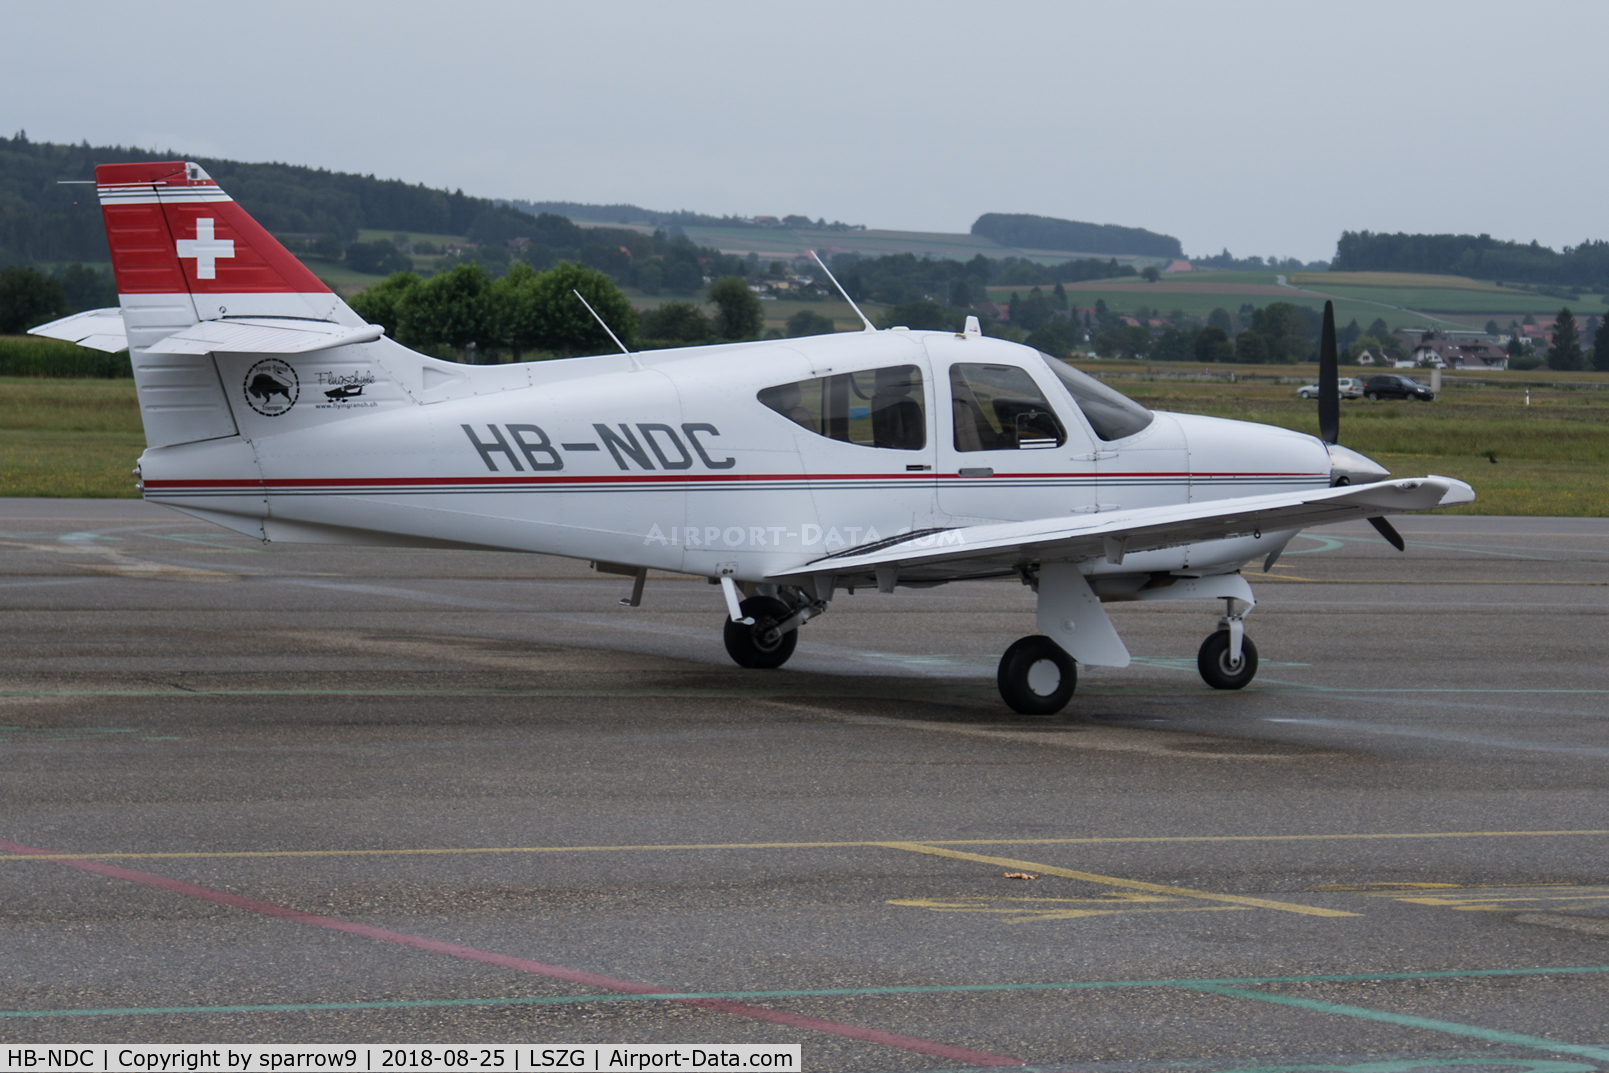 HB-NDC, 1992 Rockwell Commander 114B C/N 14550, At Grenchen